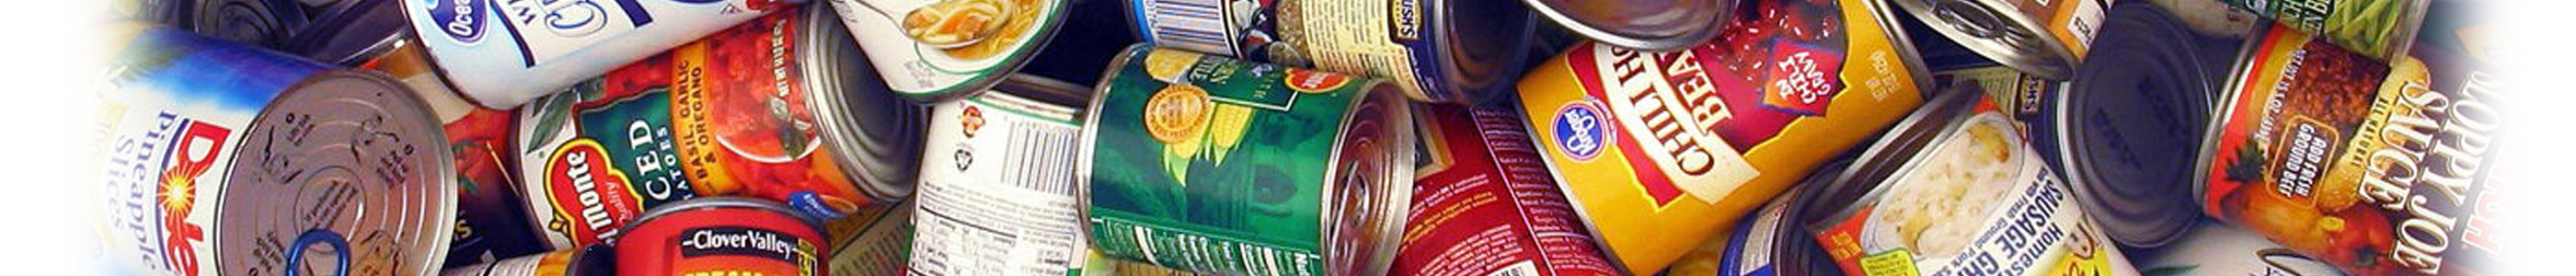 Food-Drive-Backgrounds-3